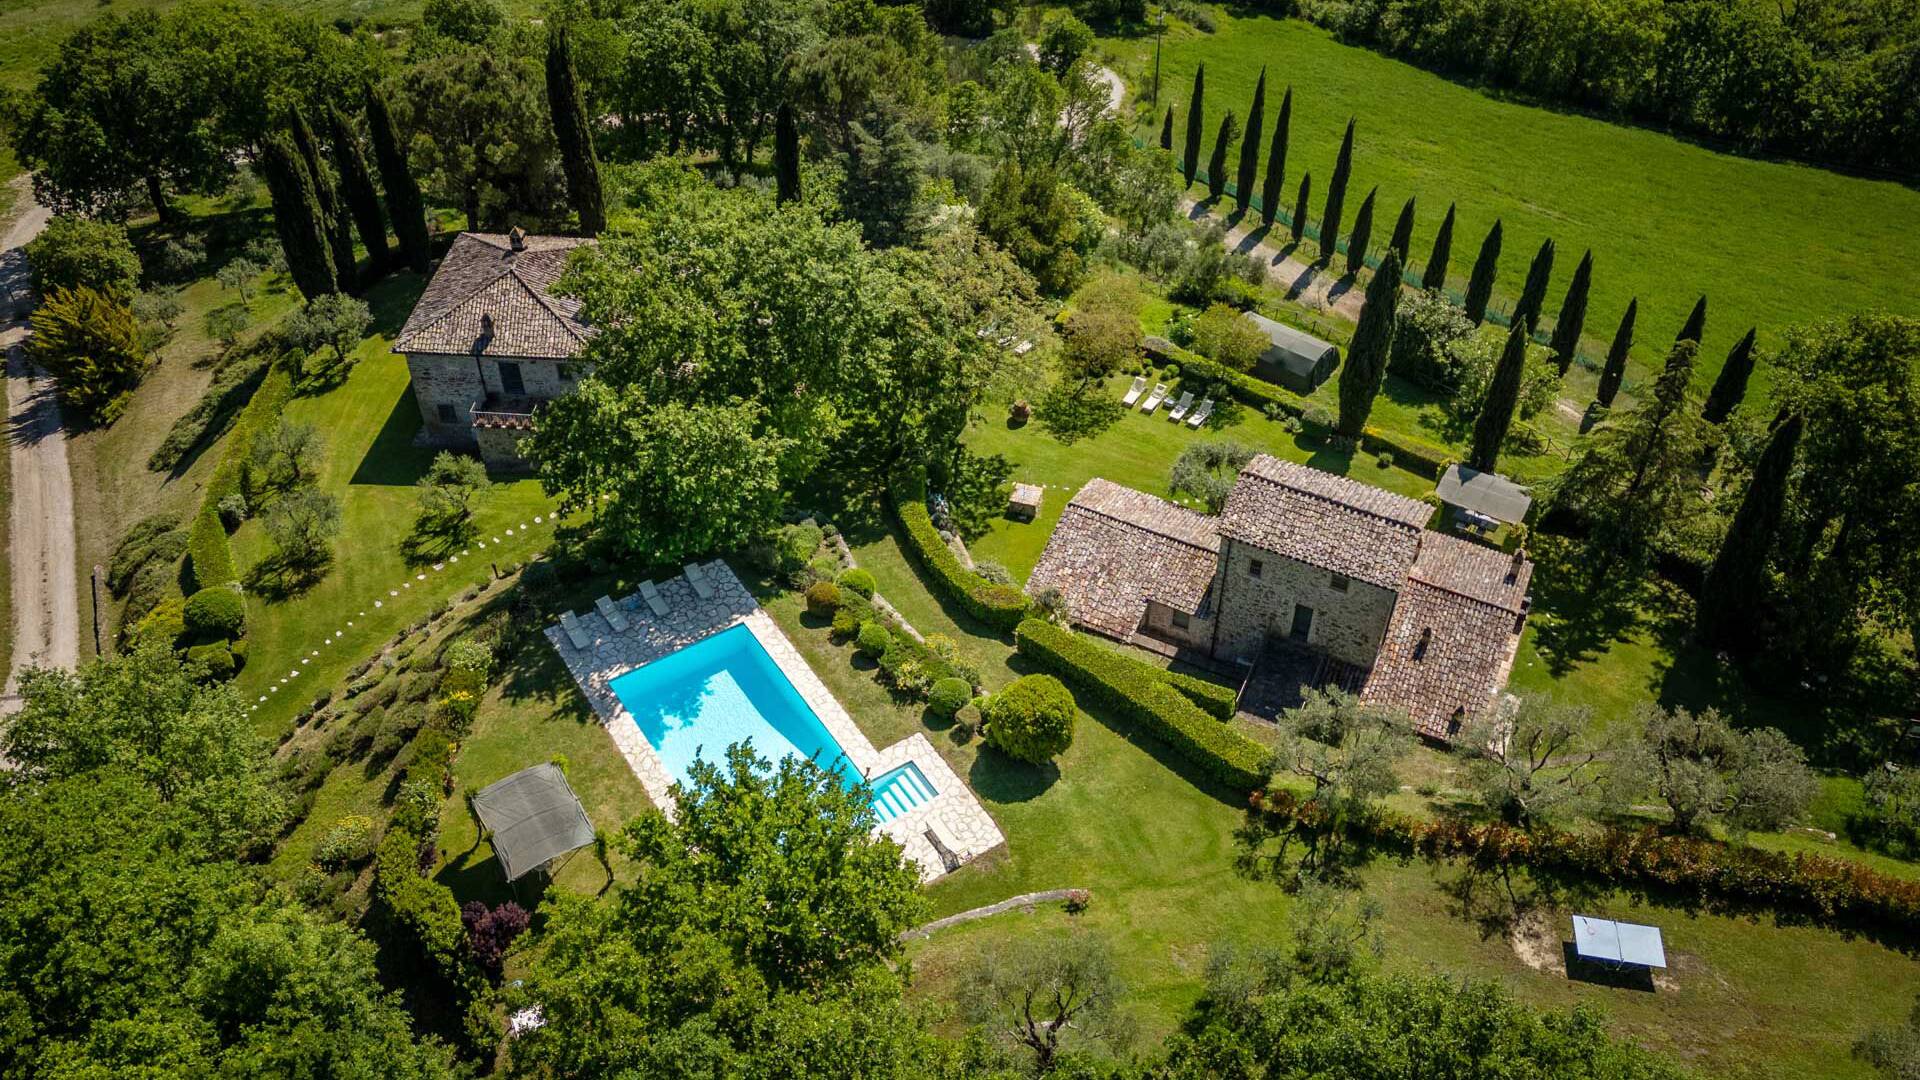 luxury holiday villa Ada for rent immersed in nature